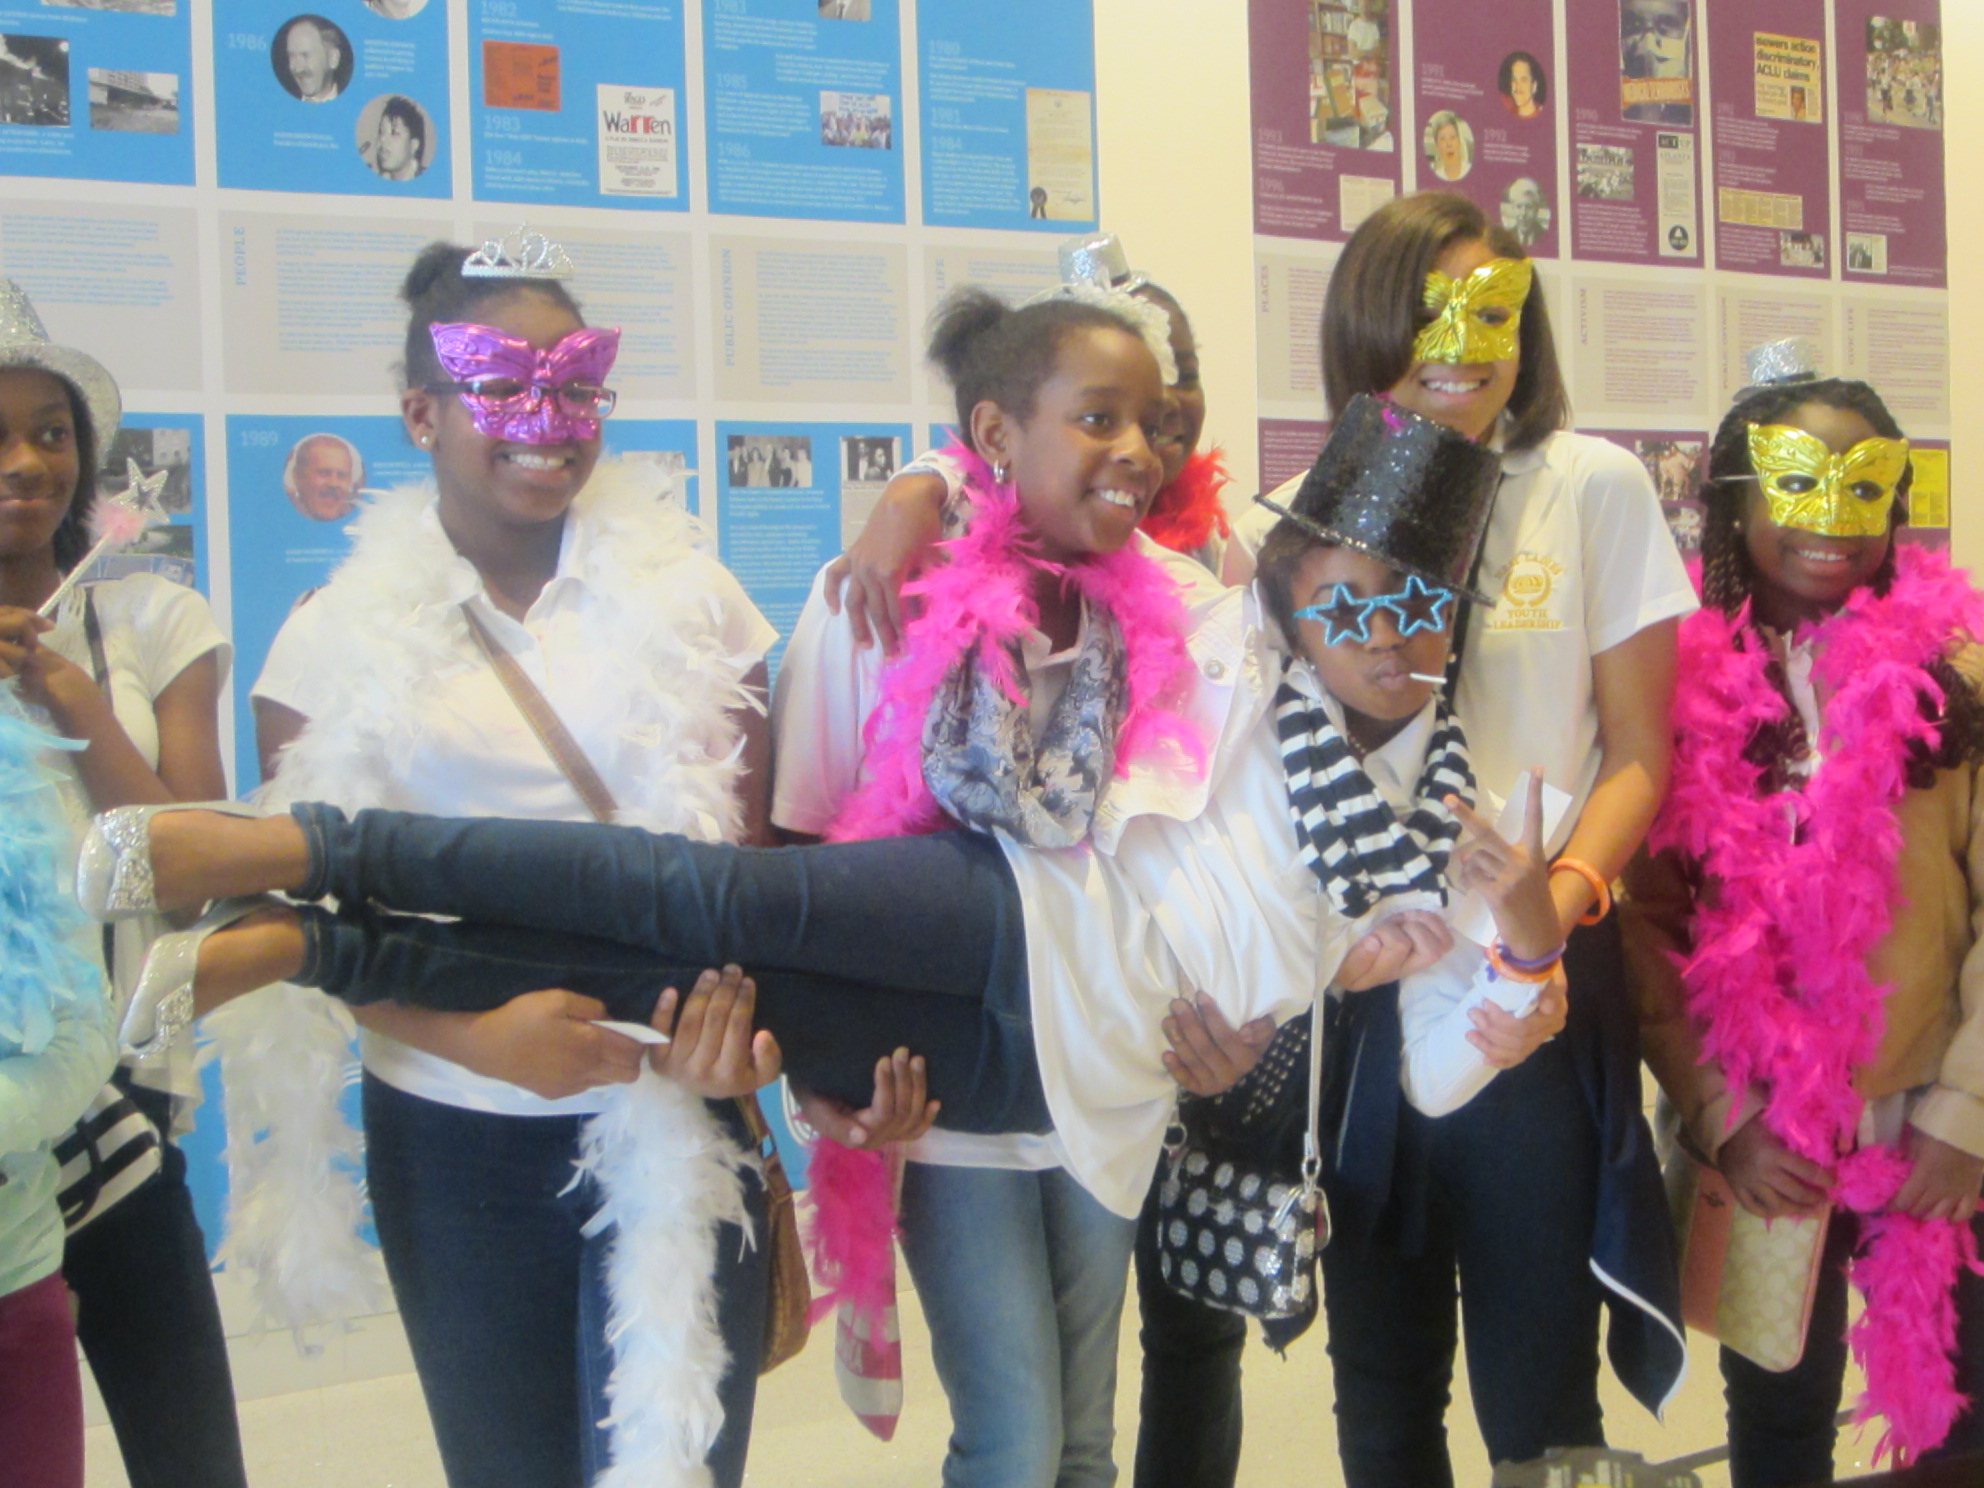 International Day of the Girl attendees pose in there best get ups outside the photo booth.